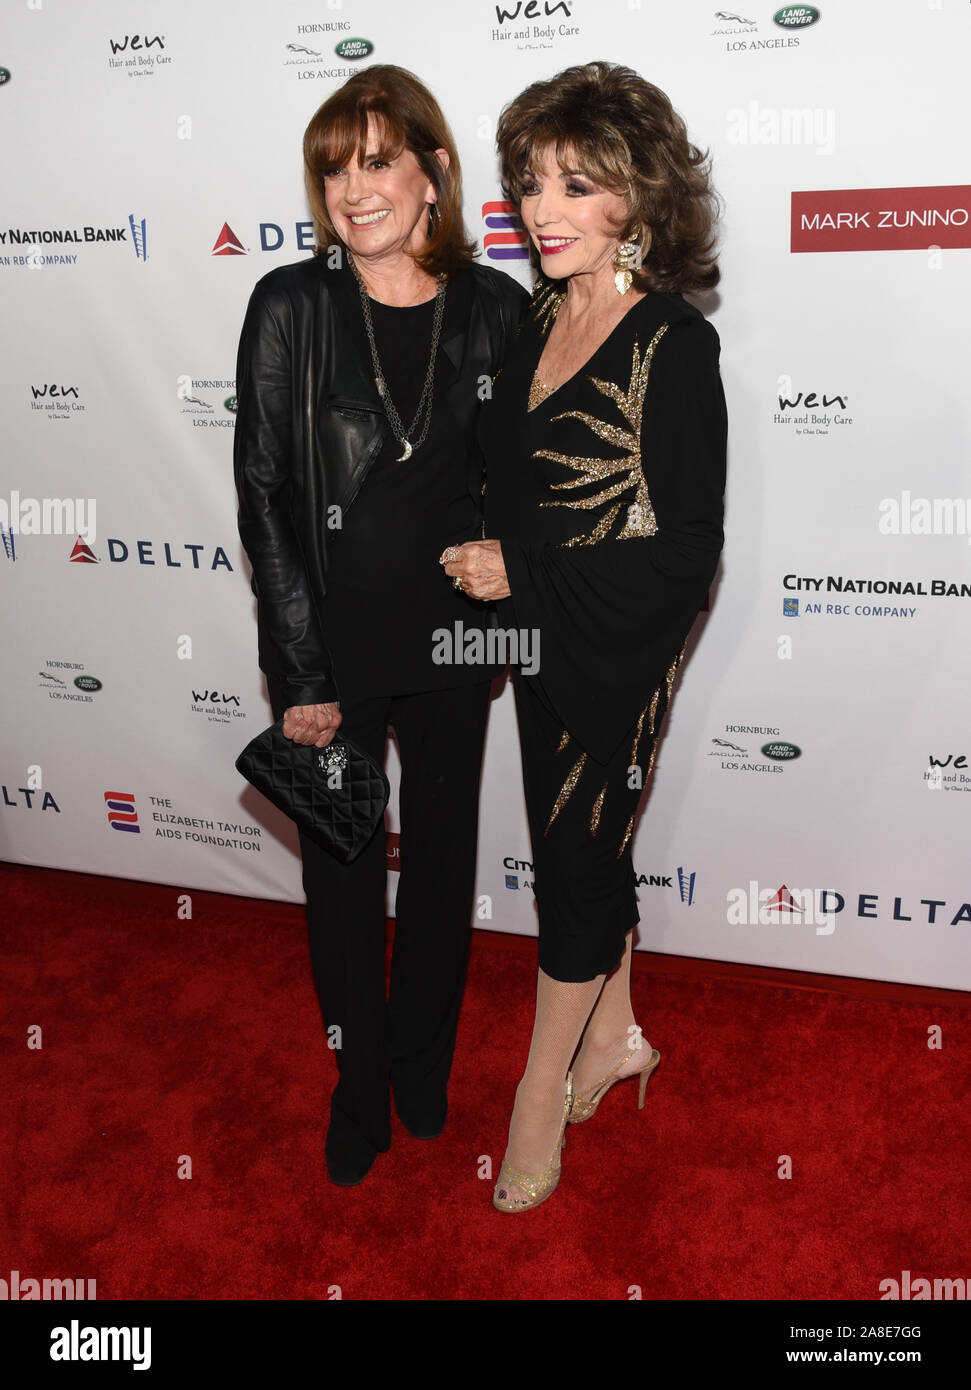 07 November 2019 - Beverly Hills, California - Linda Gray, Joan Collins. Mark Zunino Atelier Fashion and Cocktail Reception to Benefit The Elizabeth Taylor AIDS Foundation held at Mark Zunino Atelier. Photo Credit: Billy Bennight/AdMedia/MediaPunch Stock Photo